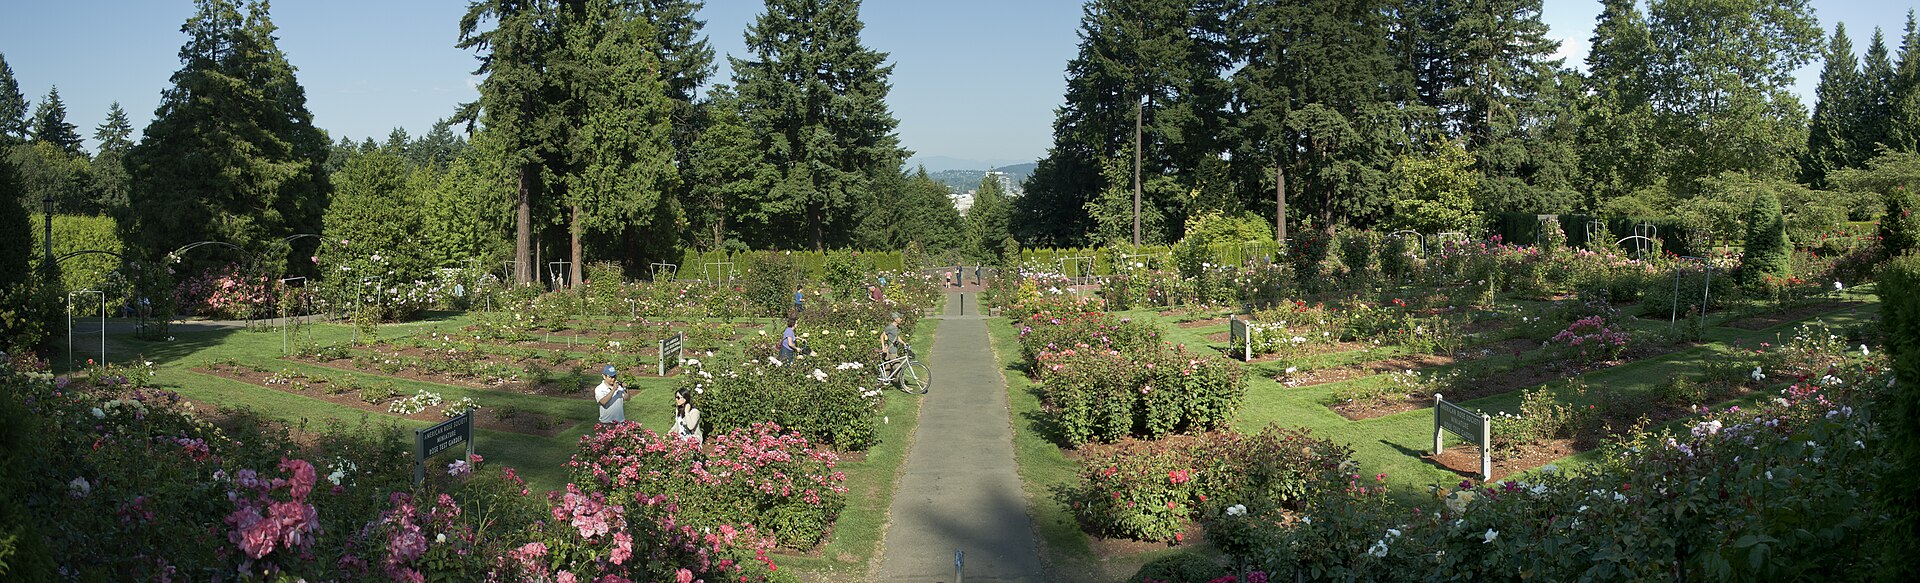 Rent a bicycle and ride to the Rose Garden